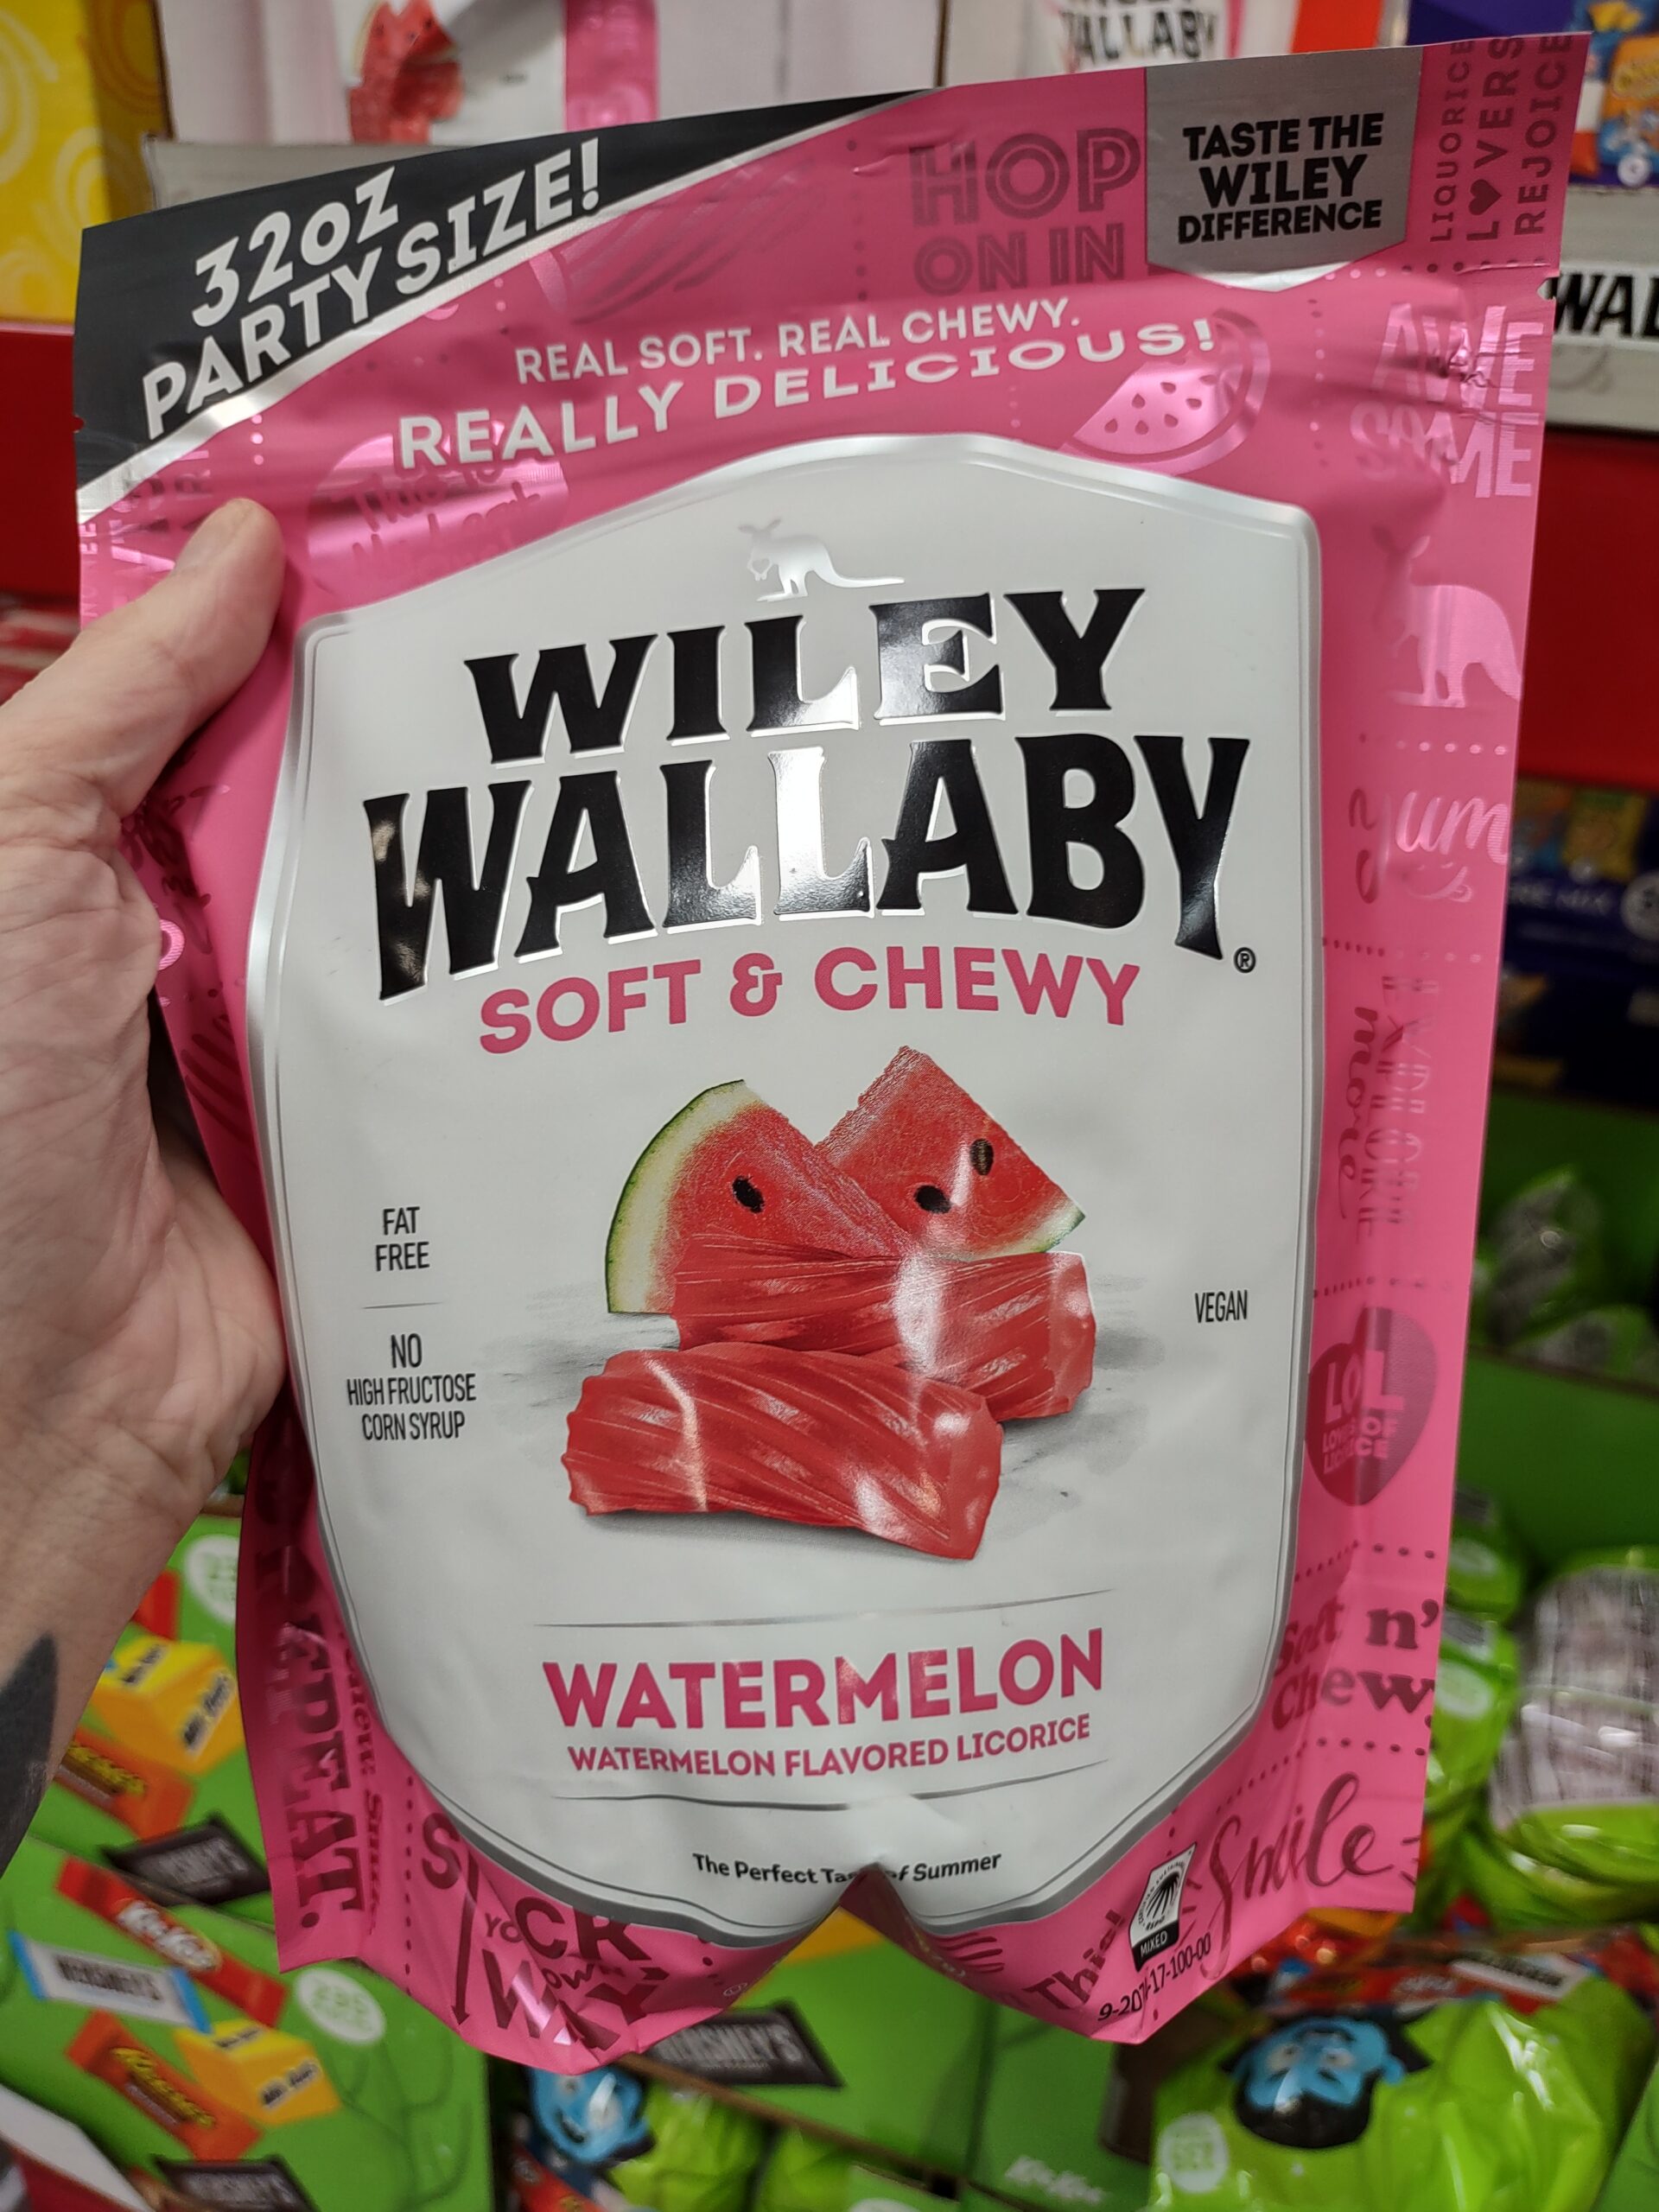 Wiley Wallaby Watermelon Licorice 32oz at Sam’s $2.41